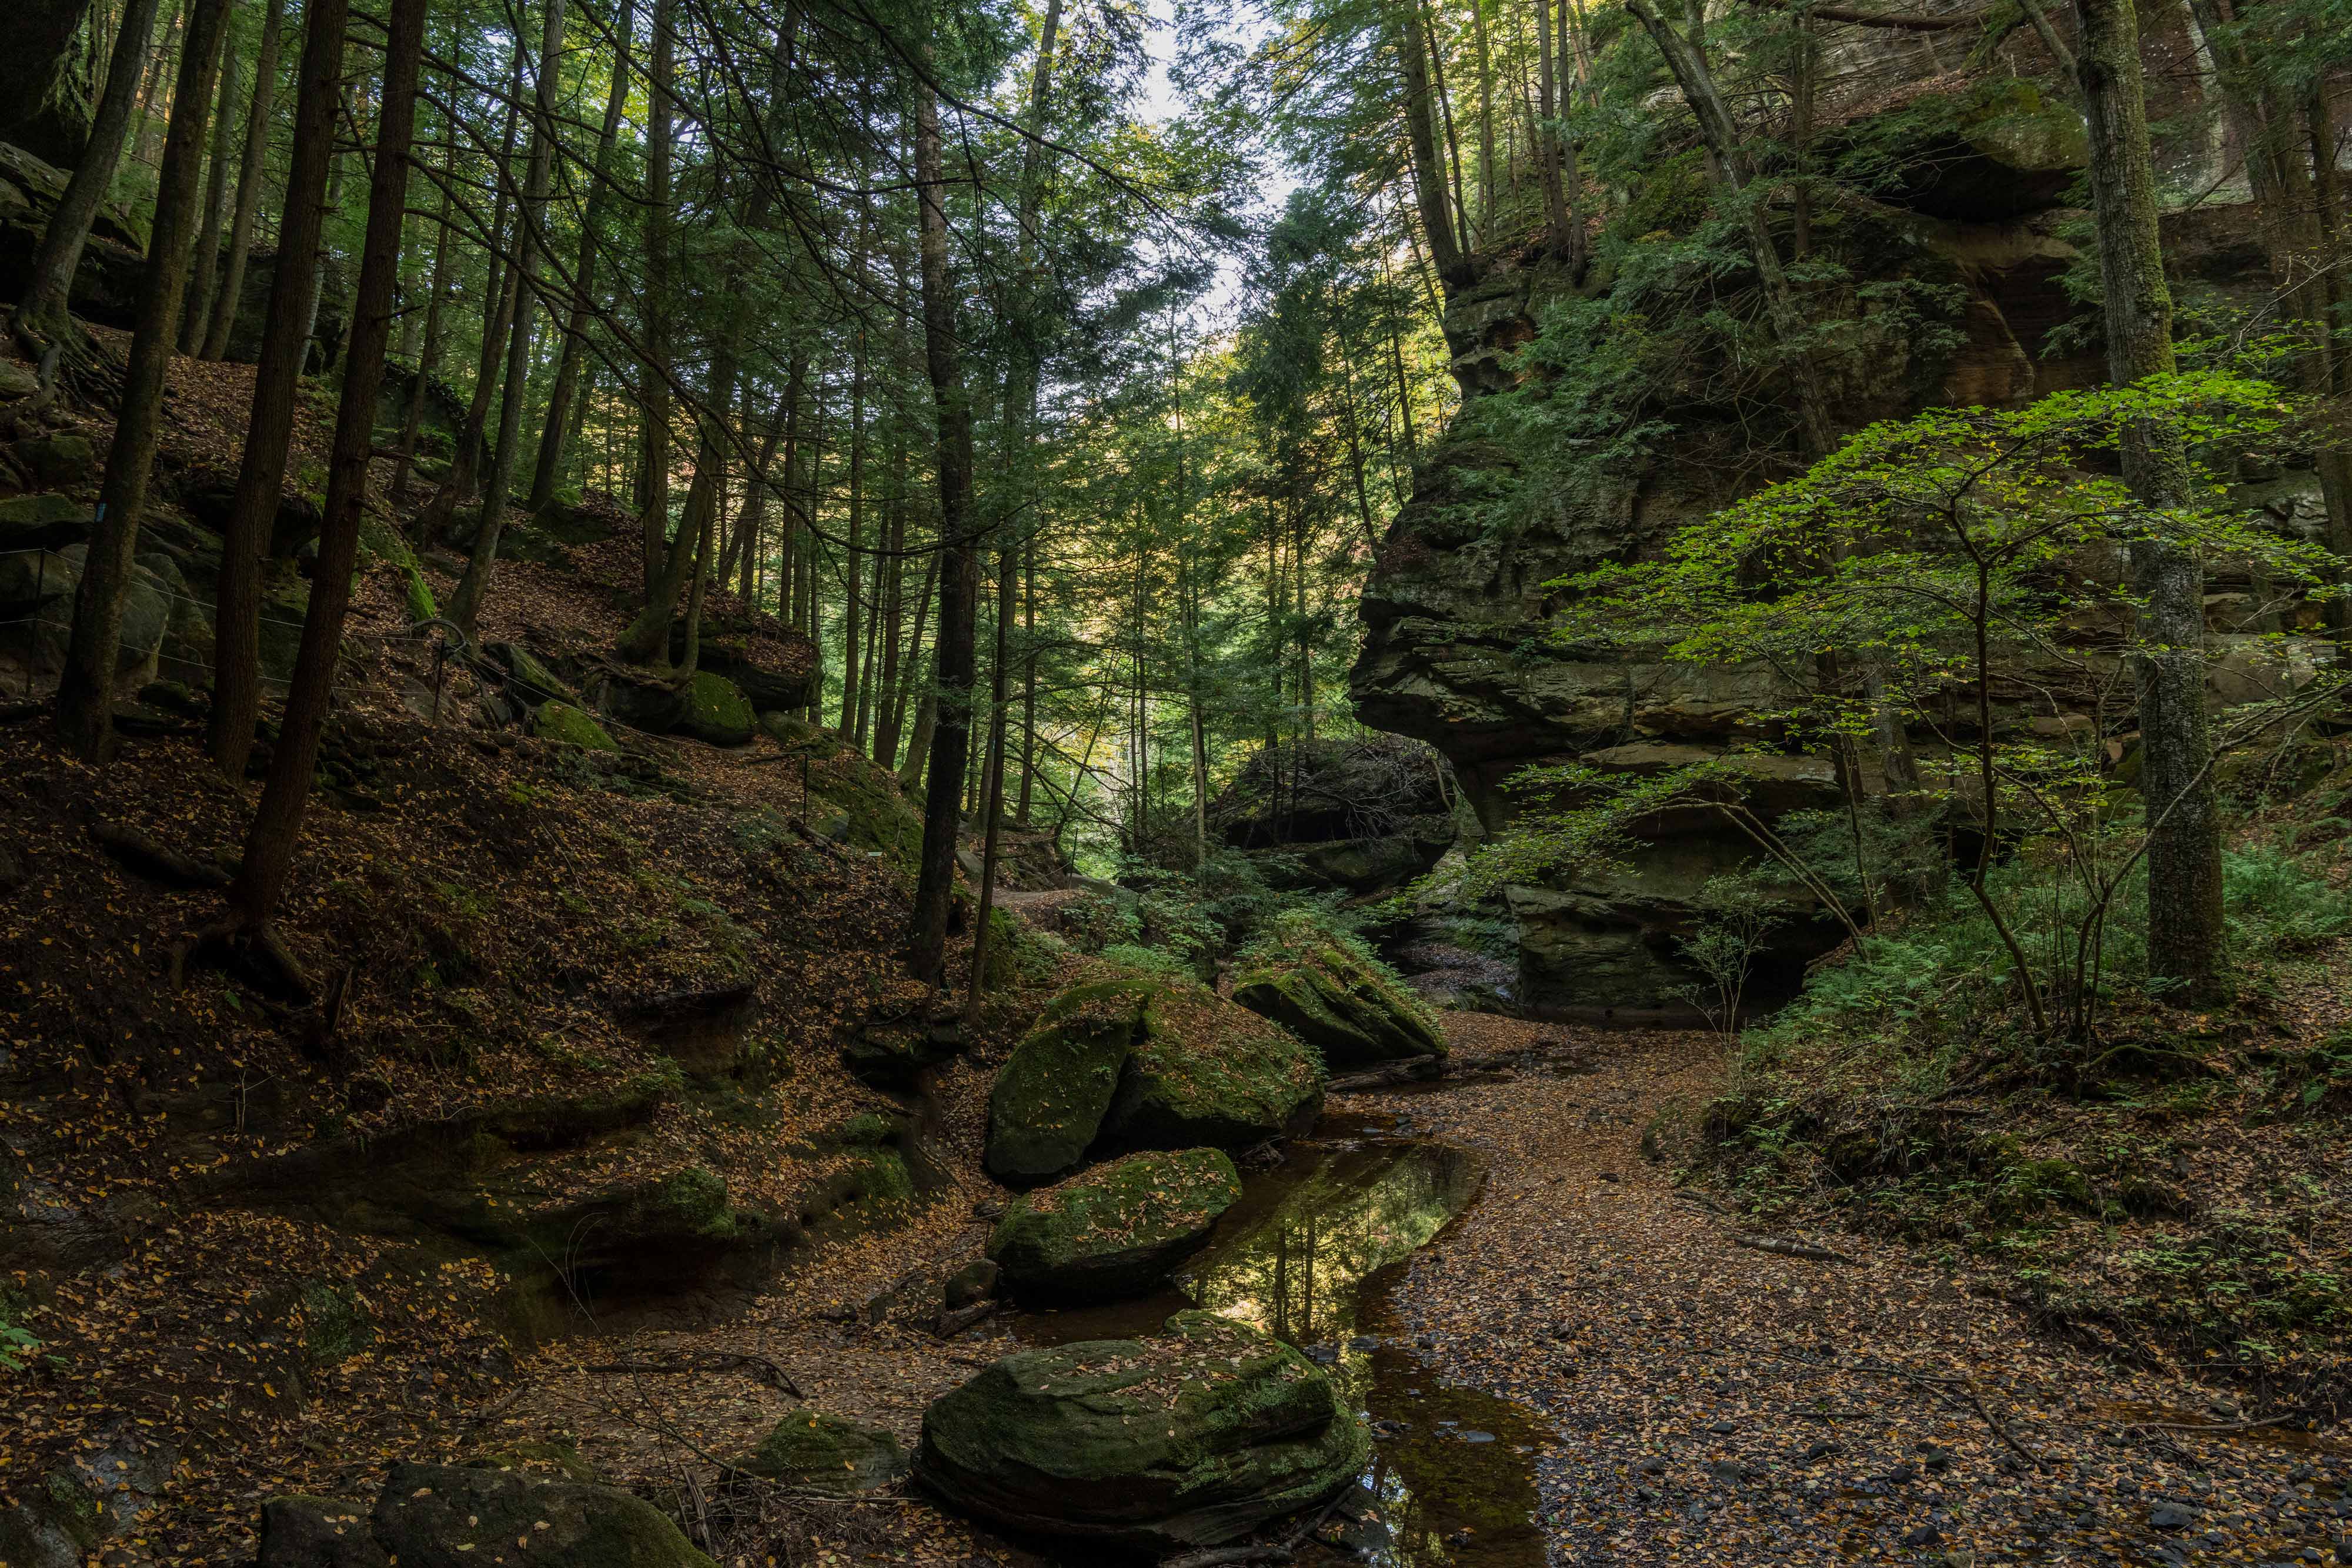 Small creek winds through lush green forest surrounded by rocky outcroppings.